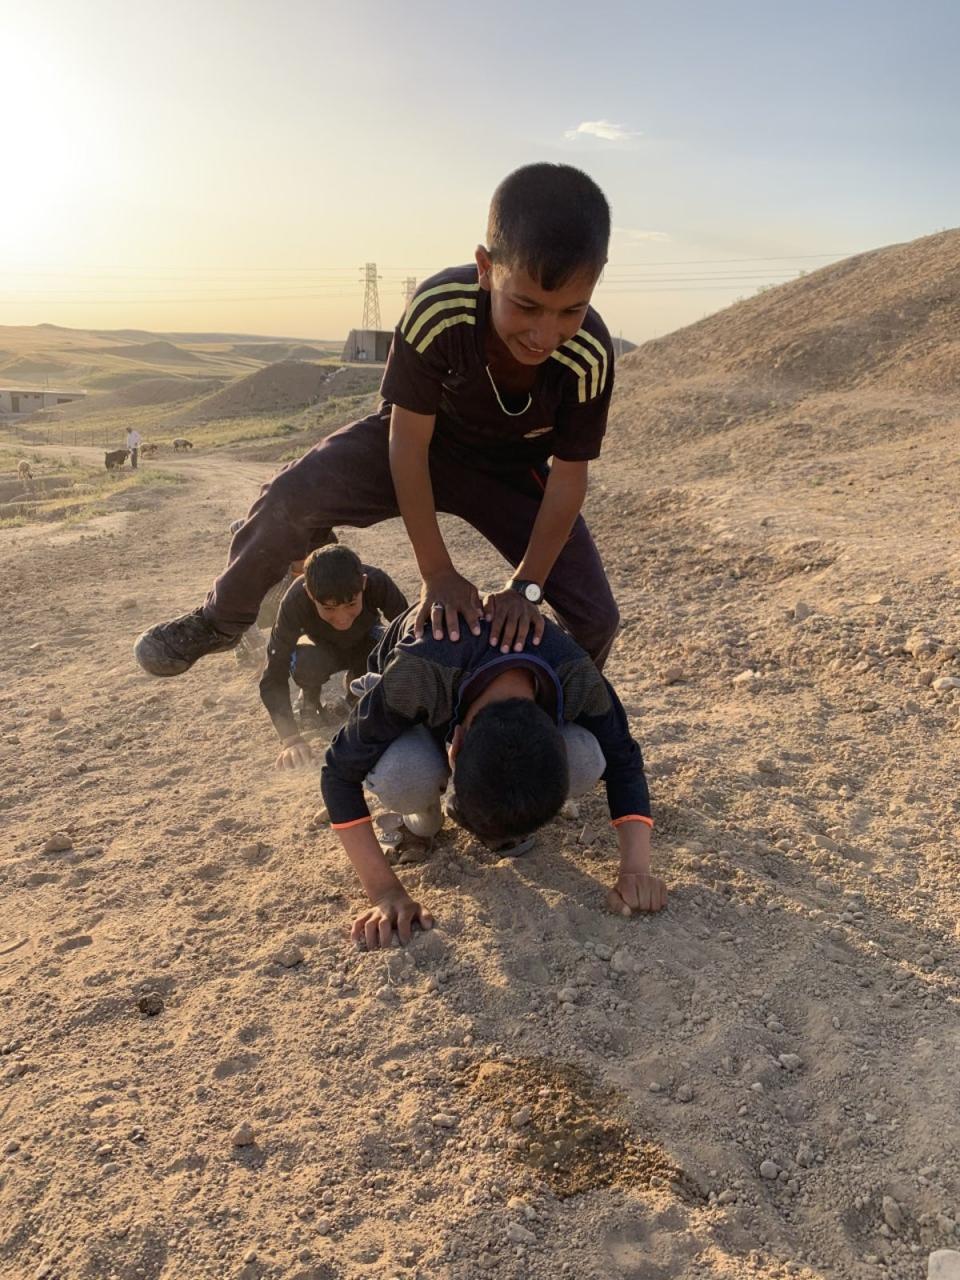 Francis Alÿs, Children's Game #20, Leapfrog, Nerkzlia, Iraq, 2018 (in collaboration with Ivan Boccara, Julien Devaux and Félix Blume. Courtesy of the artist and the Barbican)